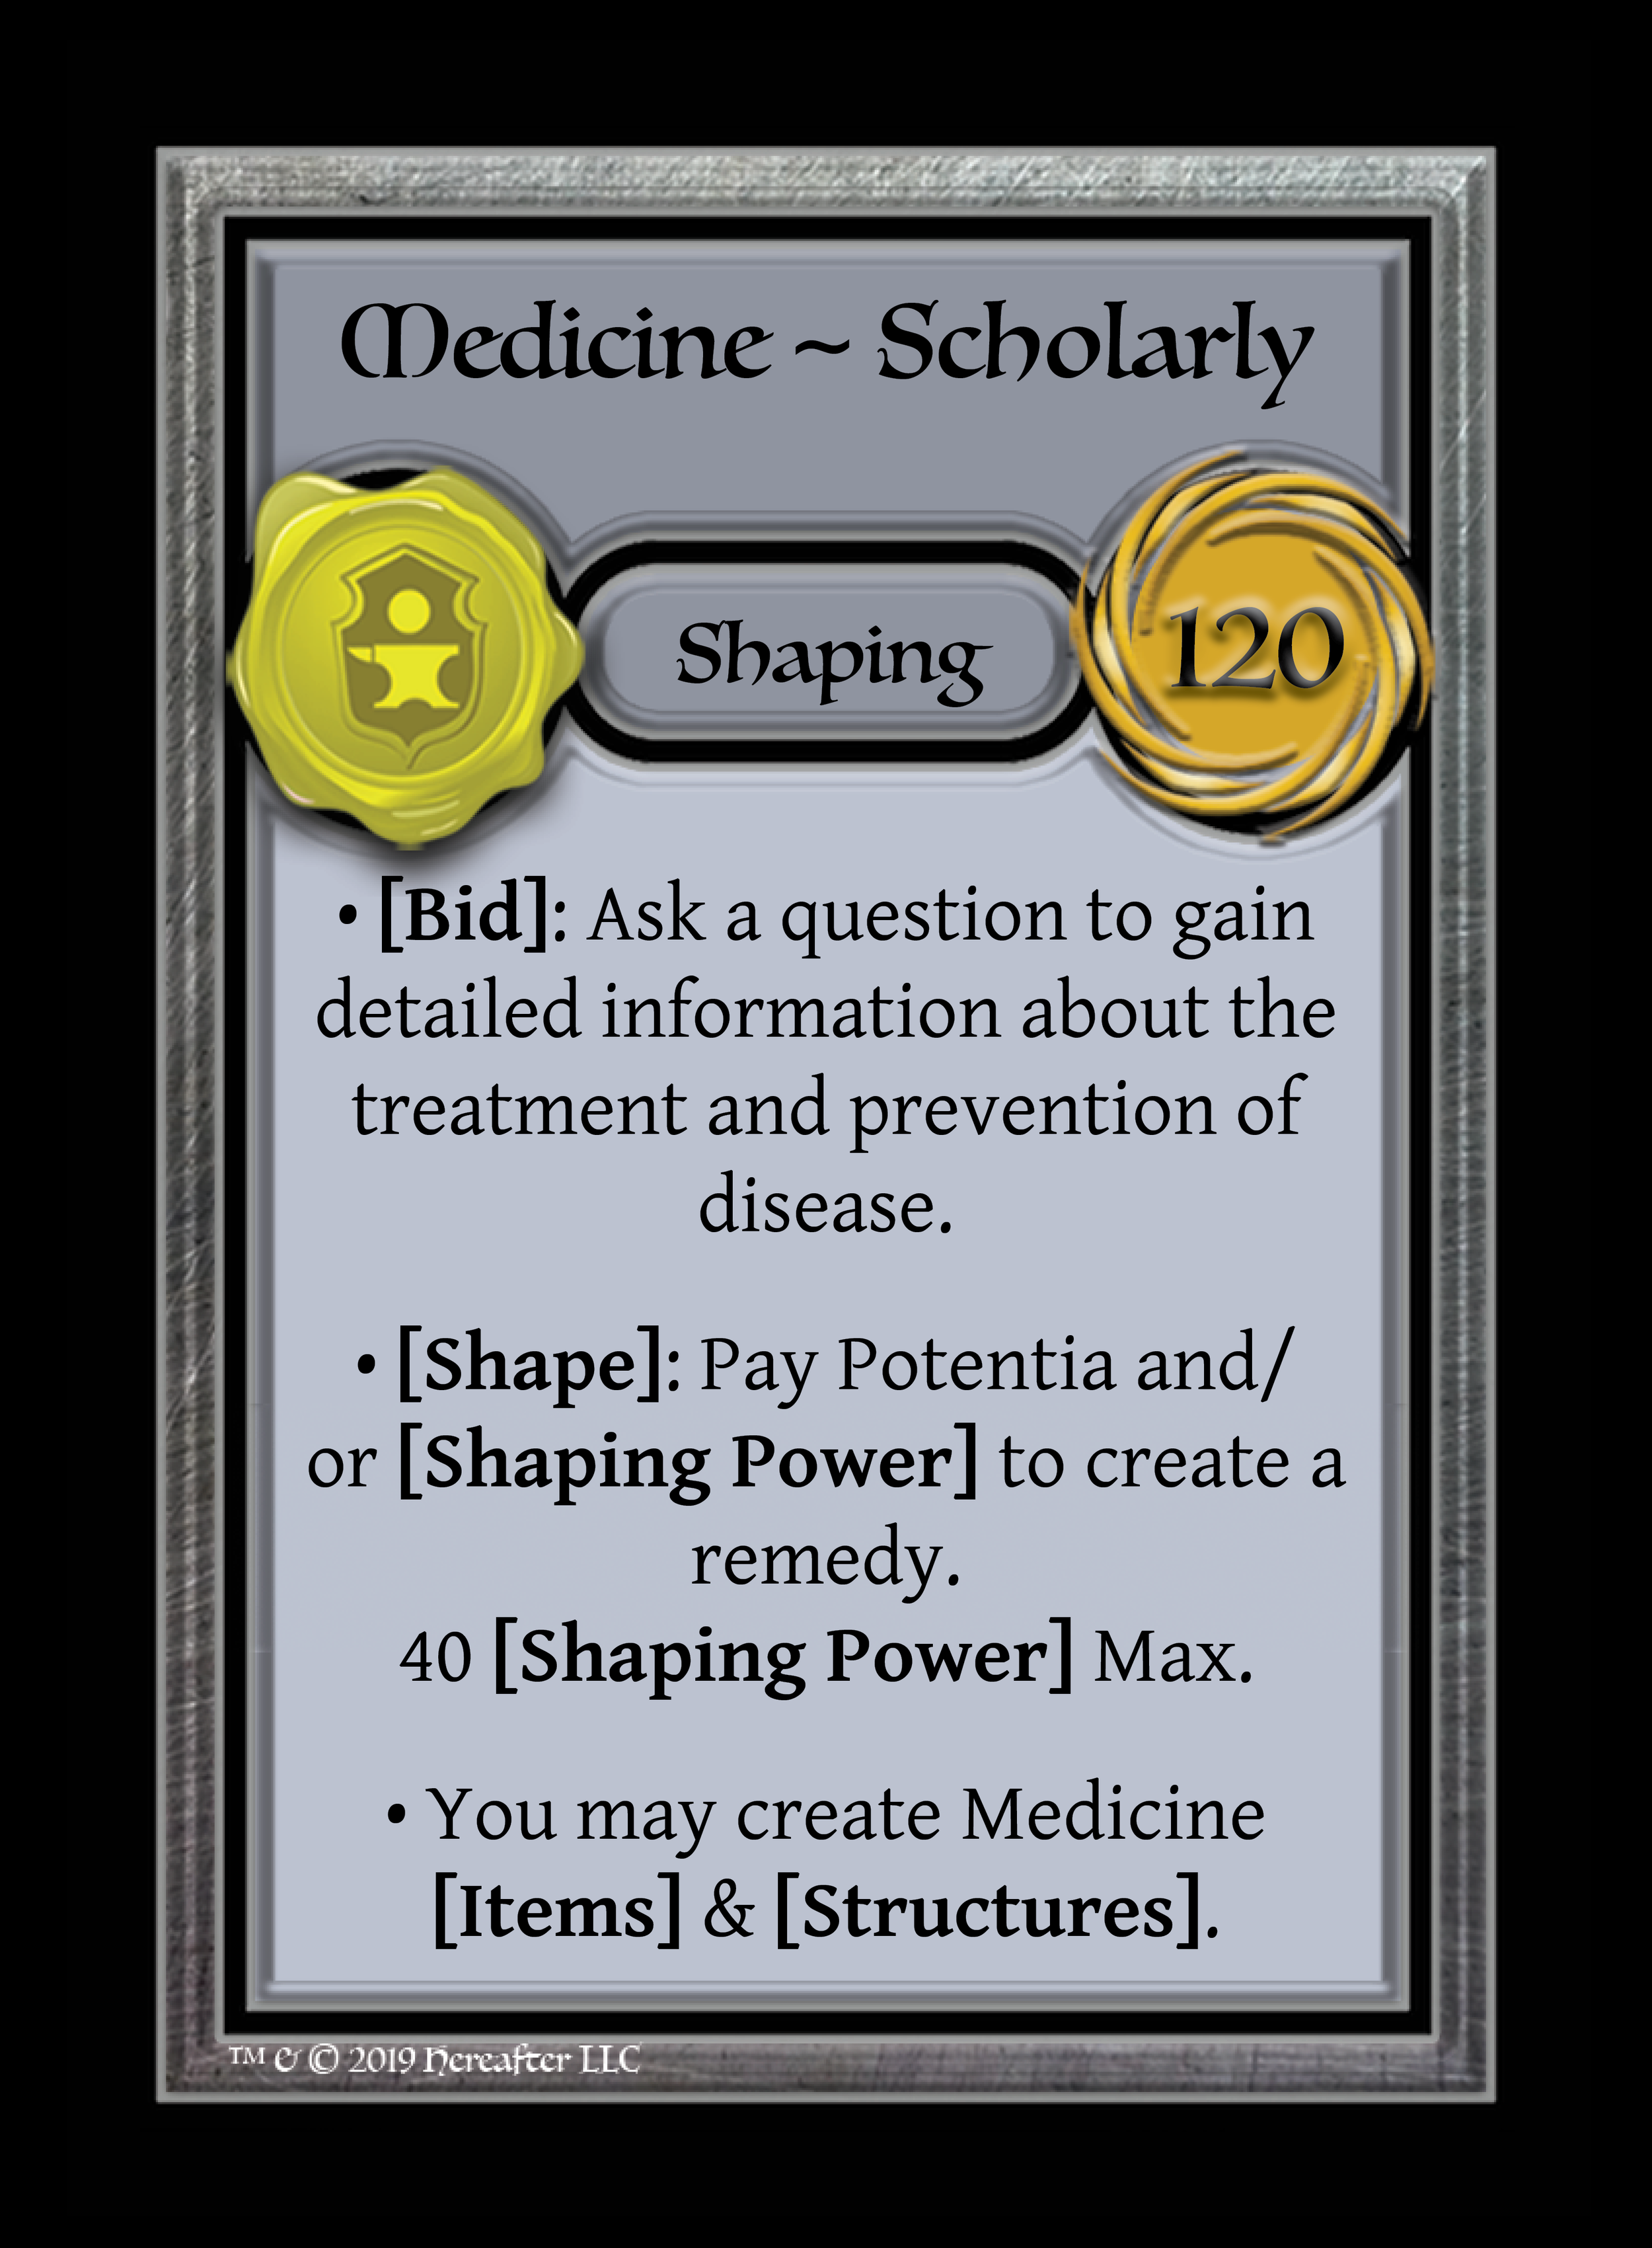 250_Shaping_Medicine ~ Scholarly_().png